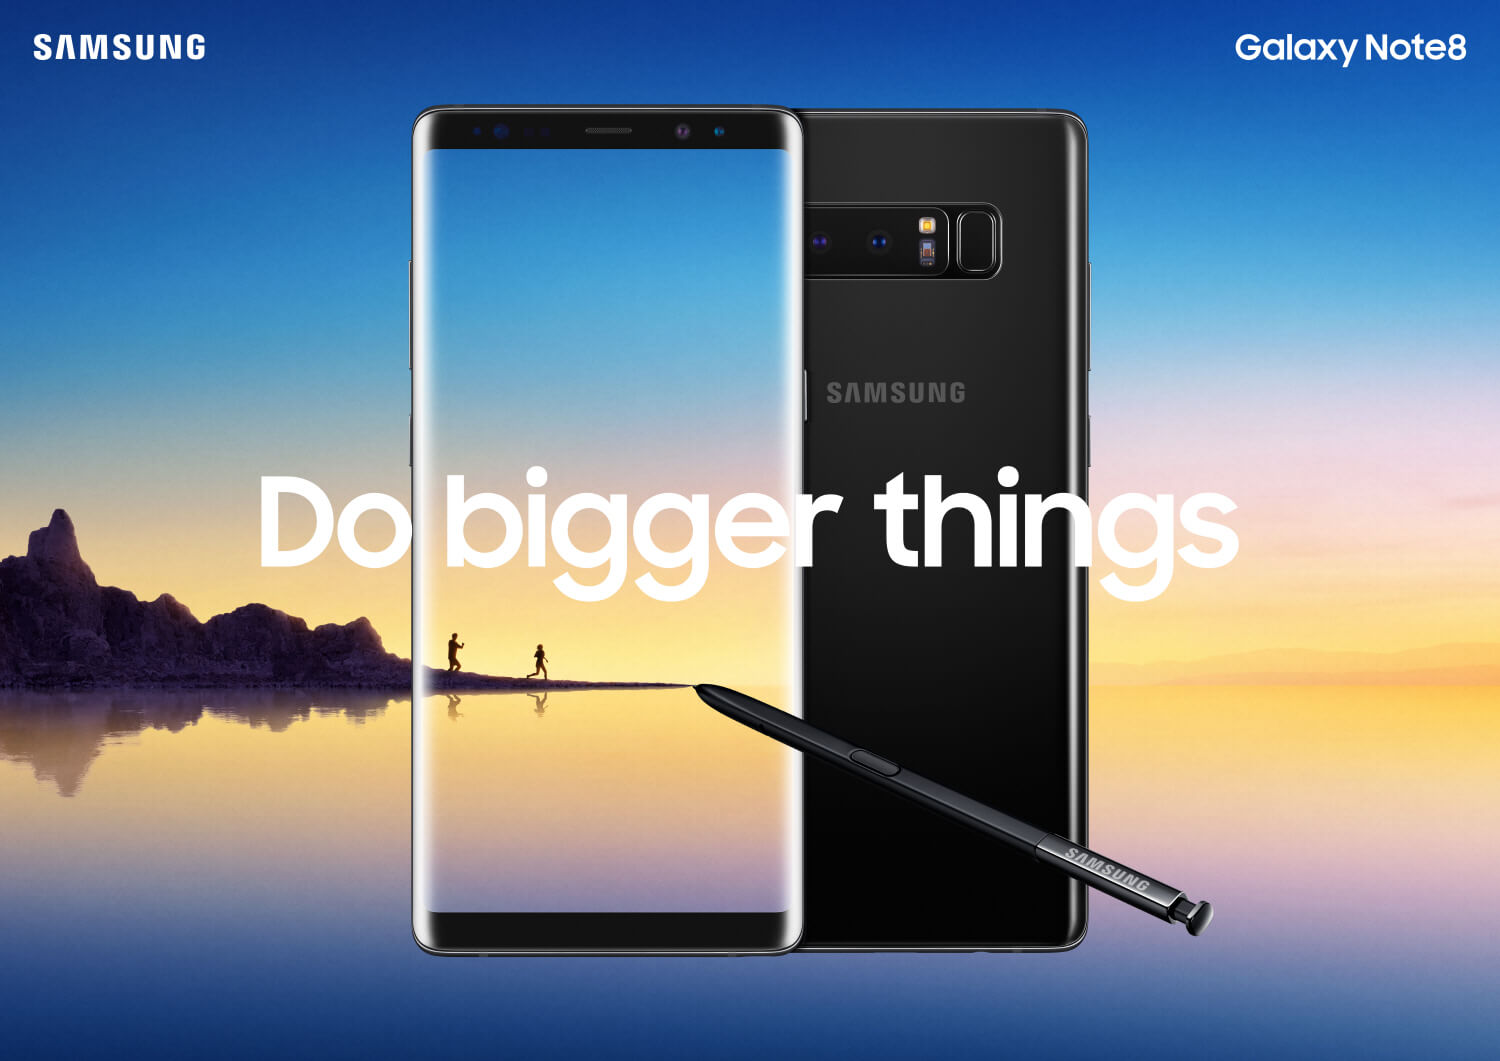 Galaxy Note 8 has the best smartphone screen, according to DisplayMate